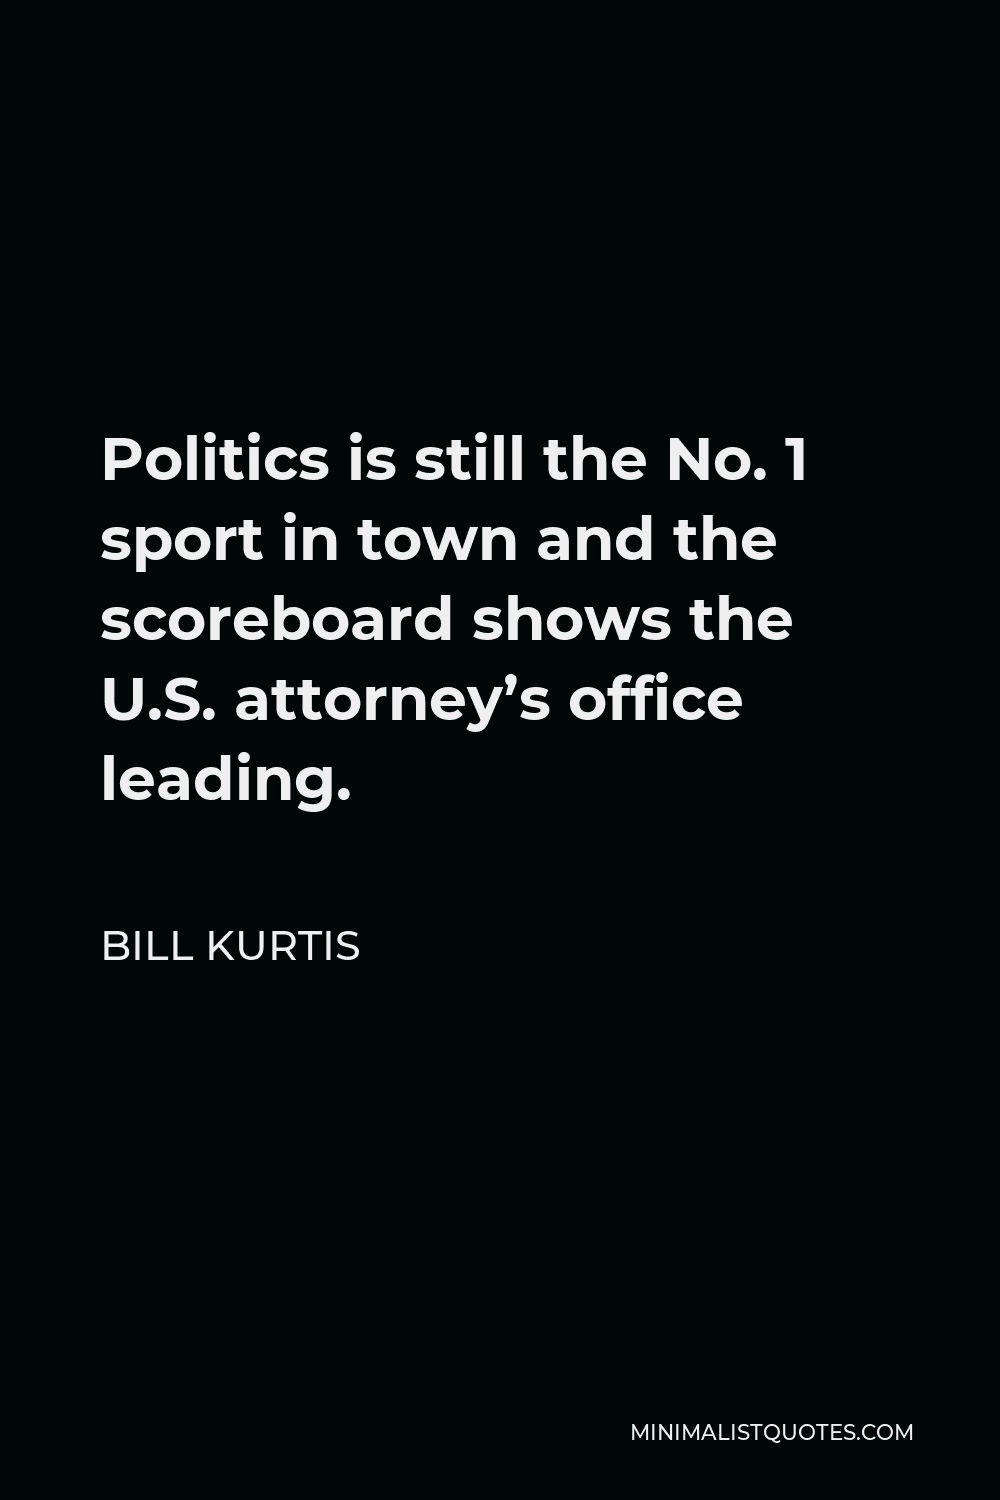 Bill Kurtis Quote - Politics is still the No. 1 sport in town and the scoreboard shows the U.S. attorney’s office leading.